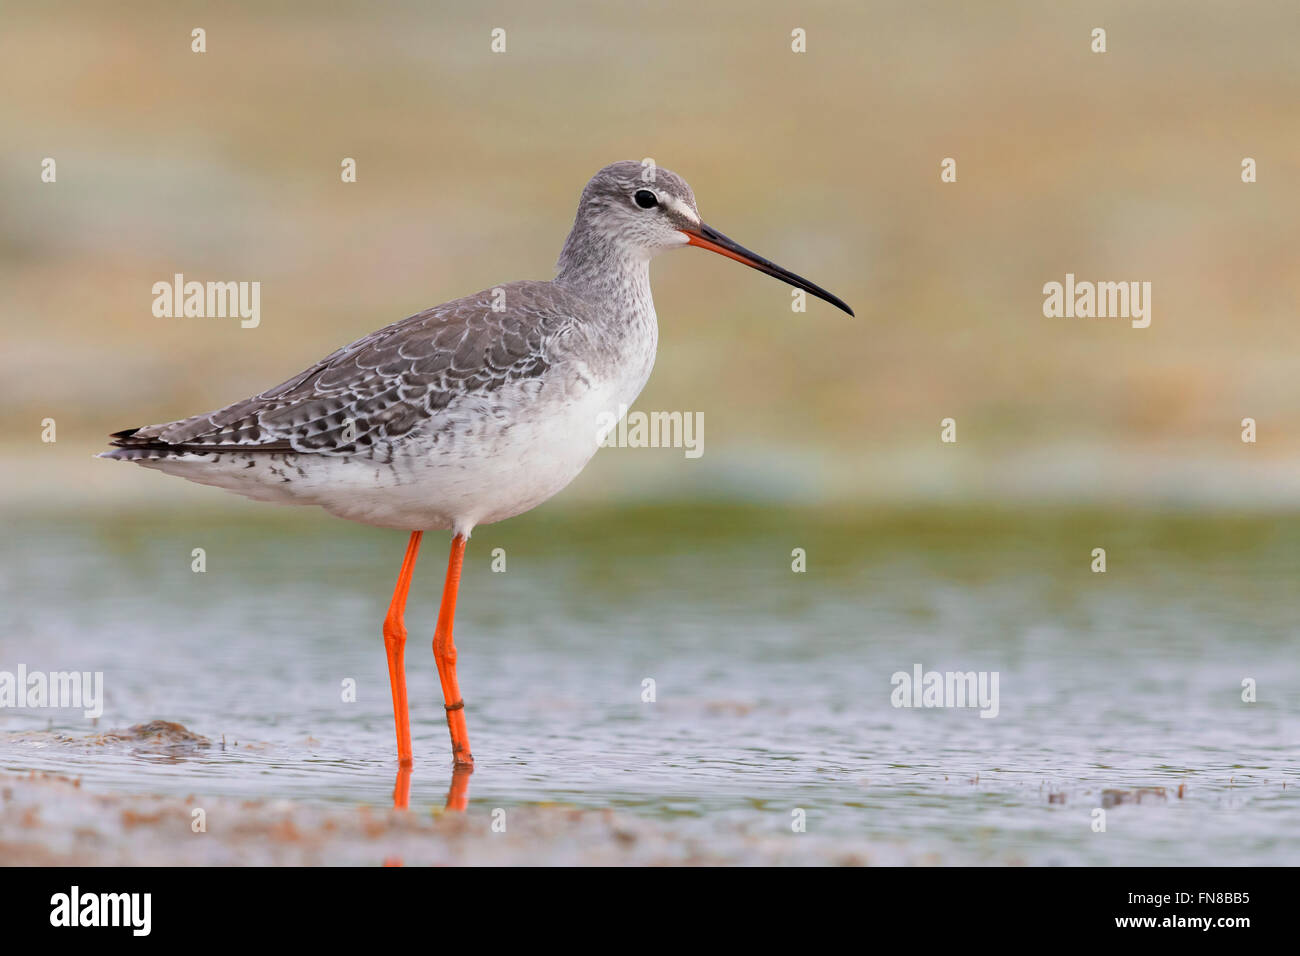 Spotted Redshank (Tringa erythropus), adult in winter plumage standing in the water, Campania, Italy Stock Photo